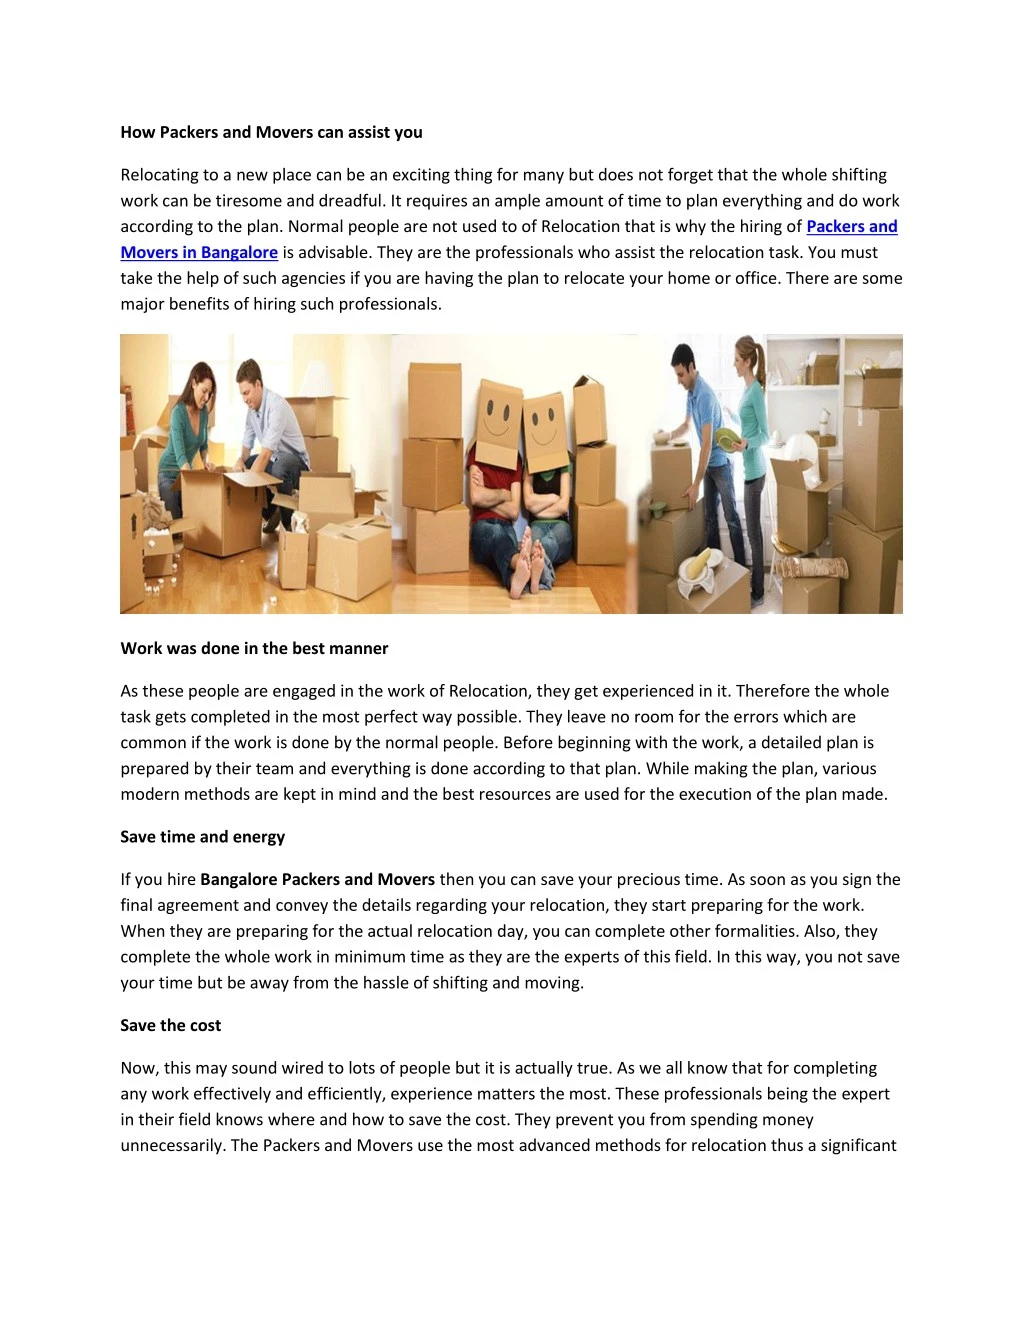 how packers and movers can assist you